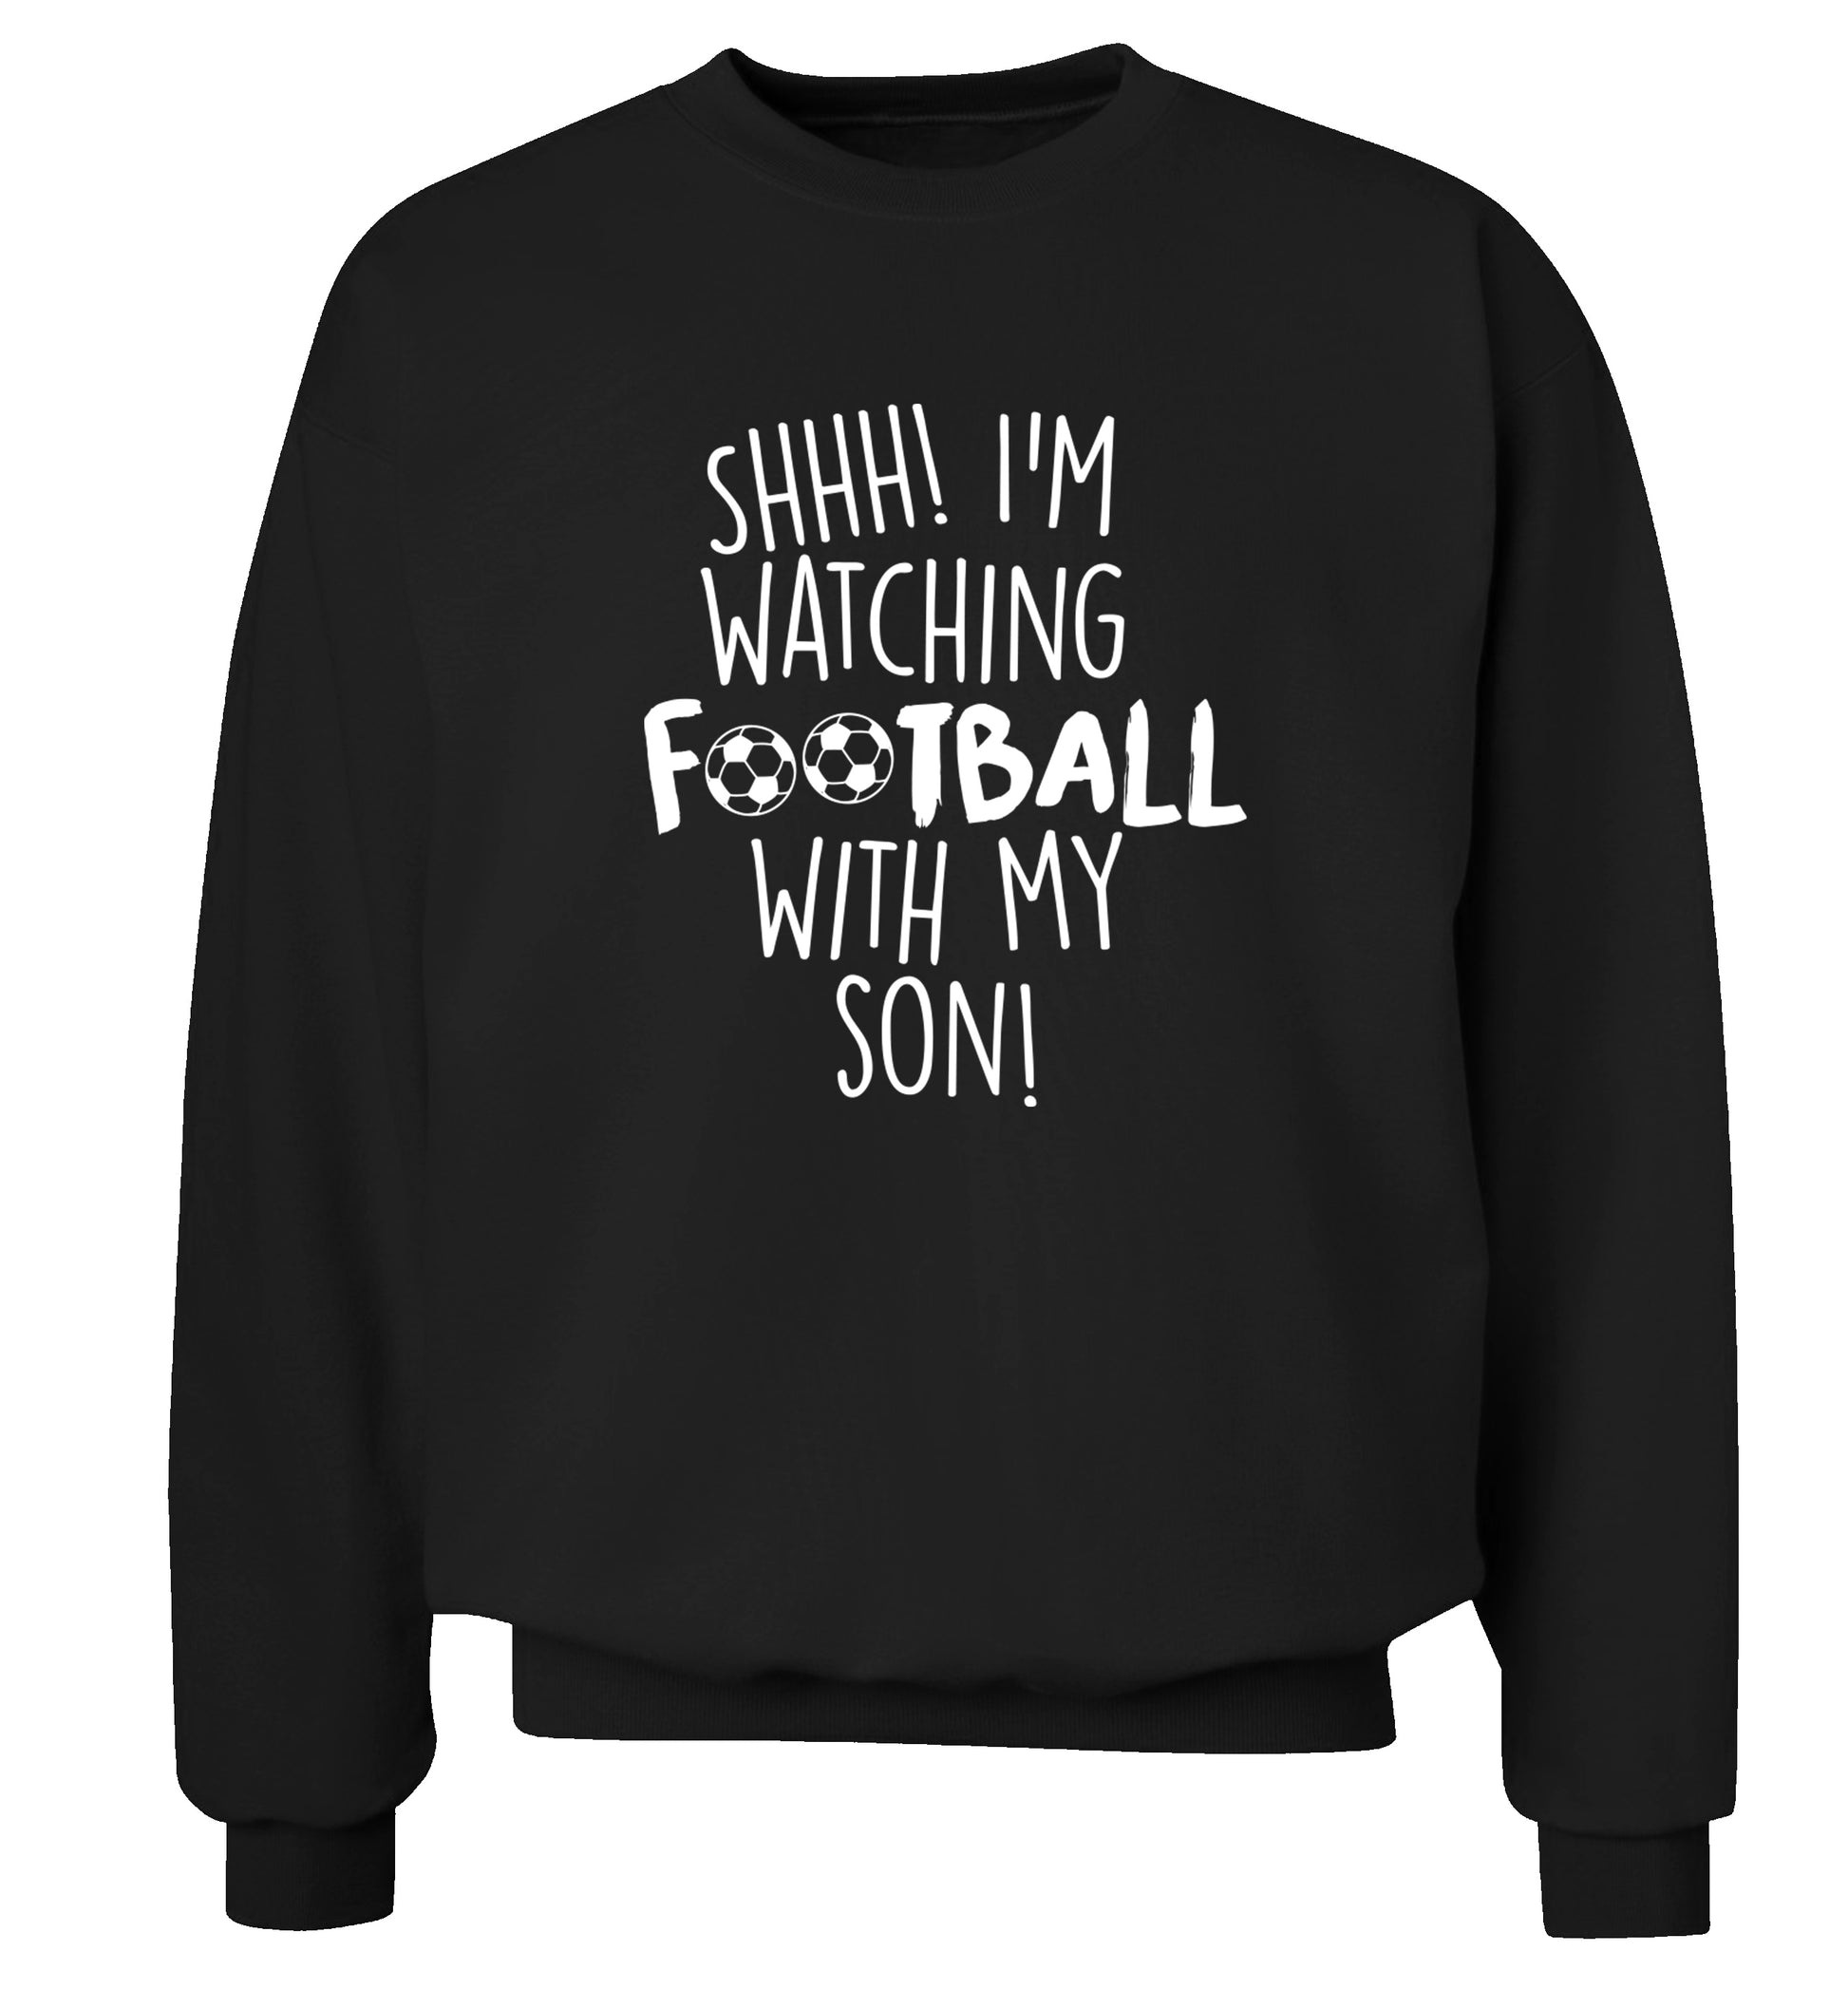 Shhh I'm watching football with my son Adult's unisexblack Sweater 2XL